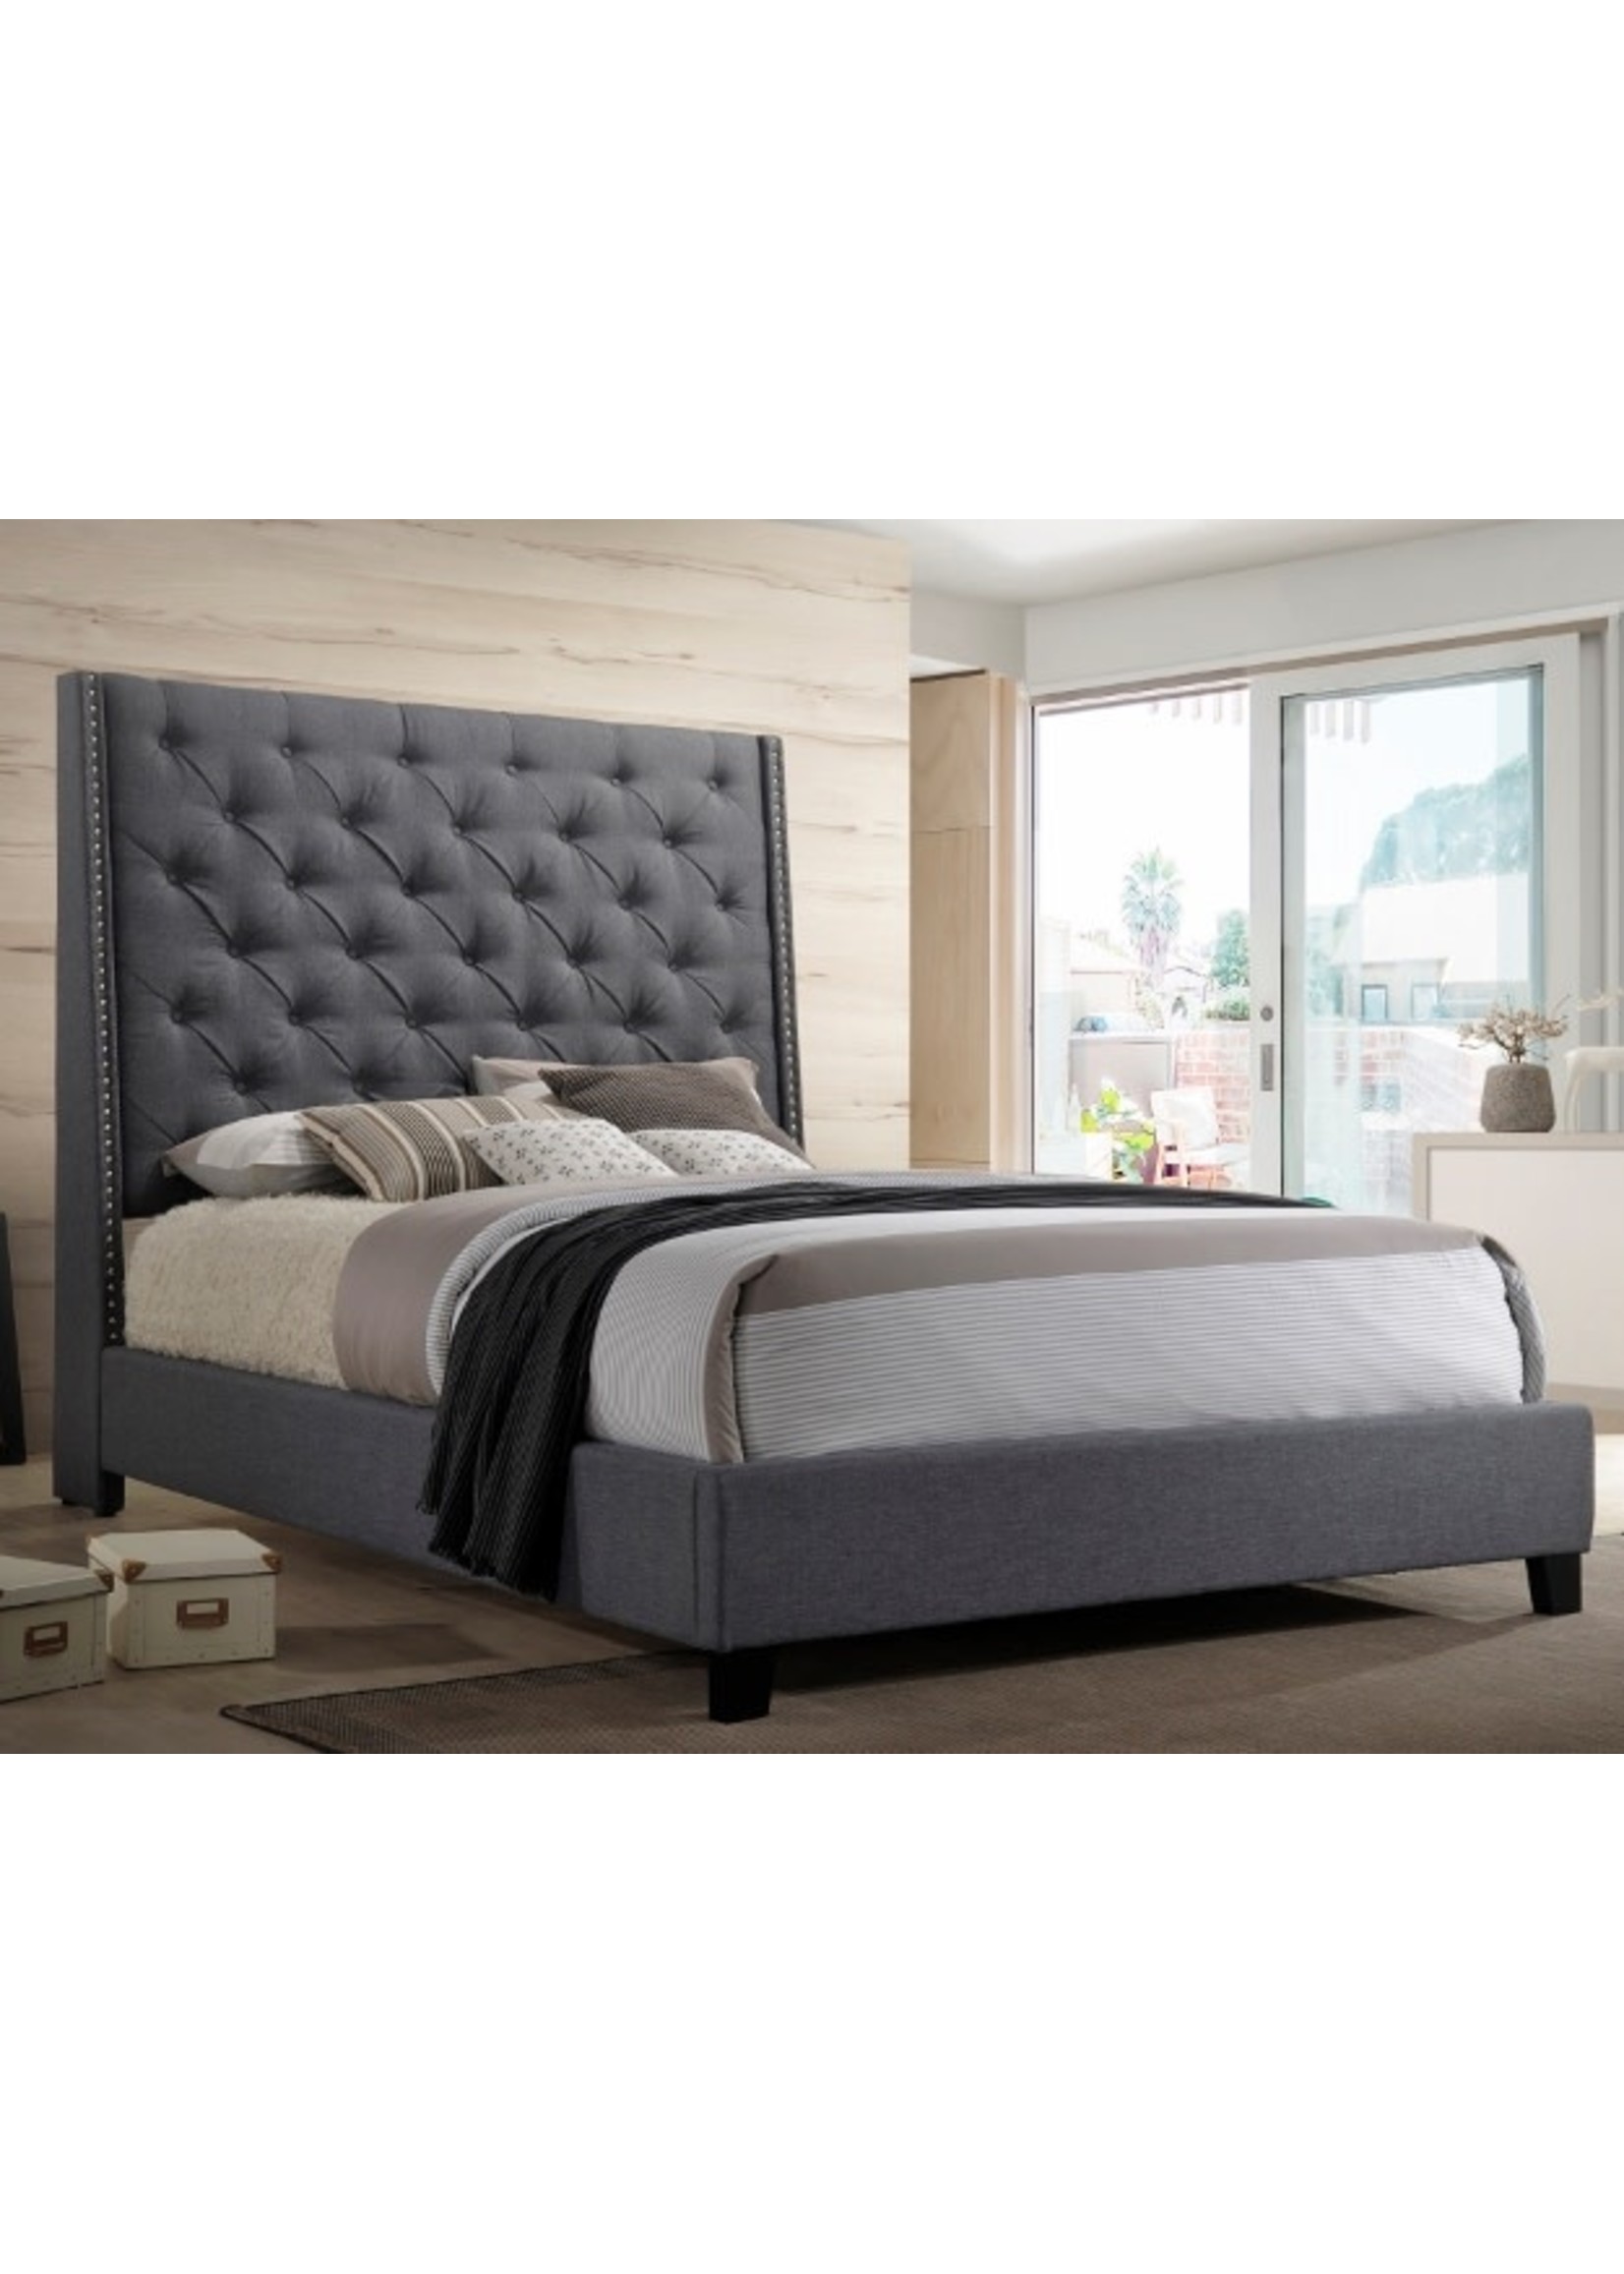 CROWNMARK 5265-K-HB/FRW 6/6 UPHOLSTERED KING BED CHANTILLY GRAY